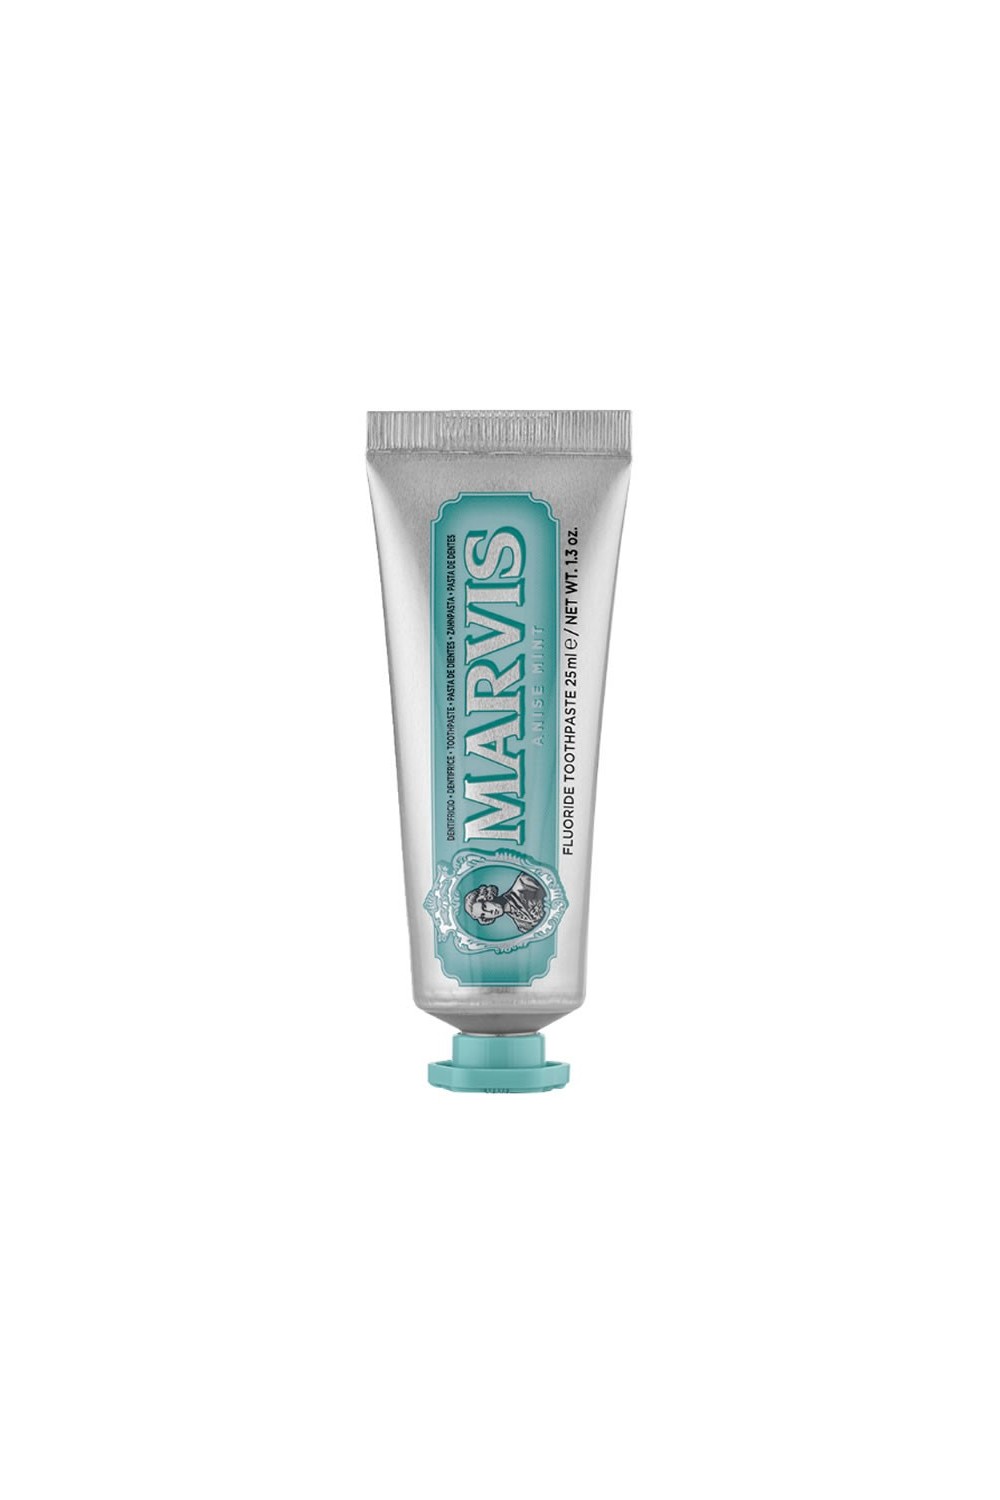 Marvis Anise Mint Toothpaste 25ml